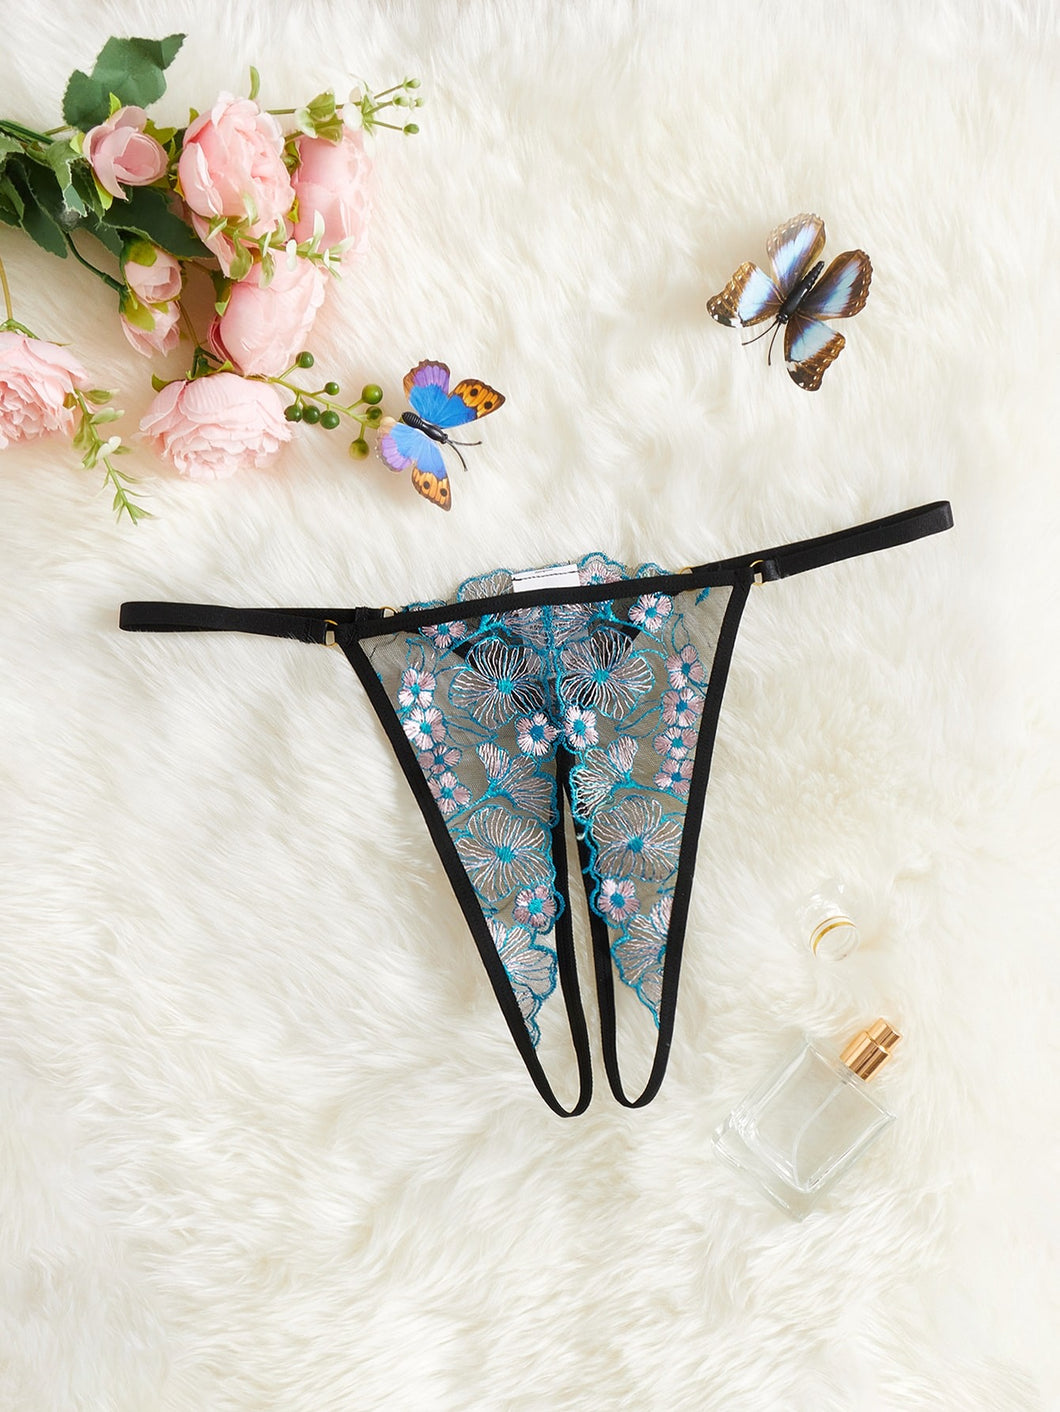 Plus Floral Embroidery Mesh Crotchless Panty